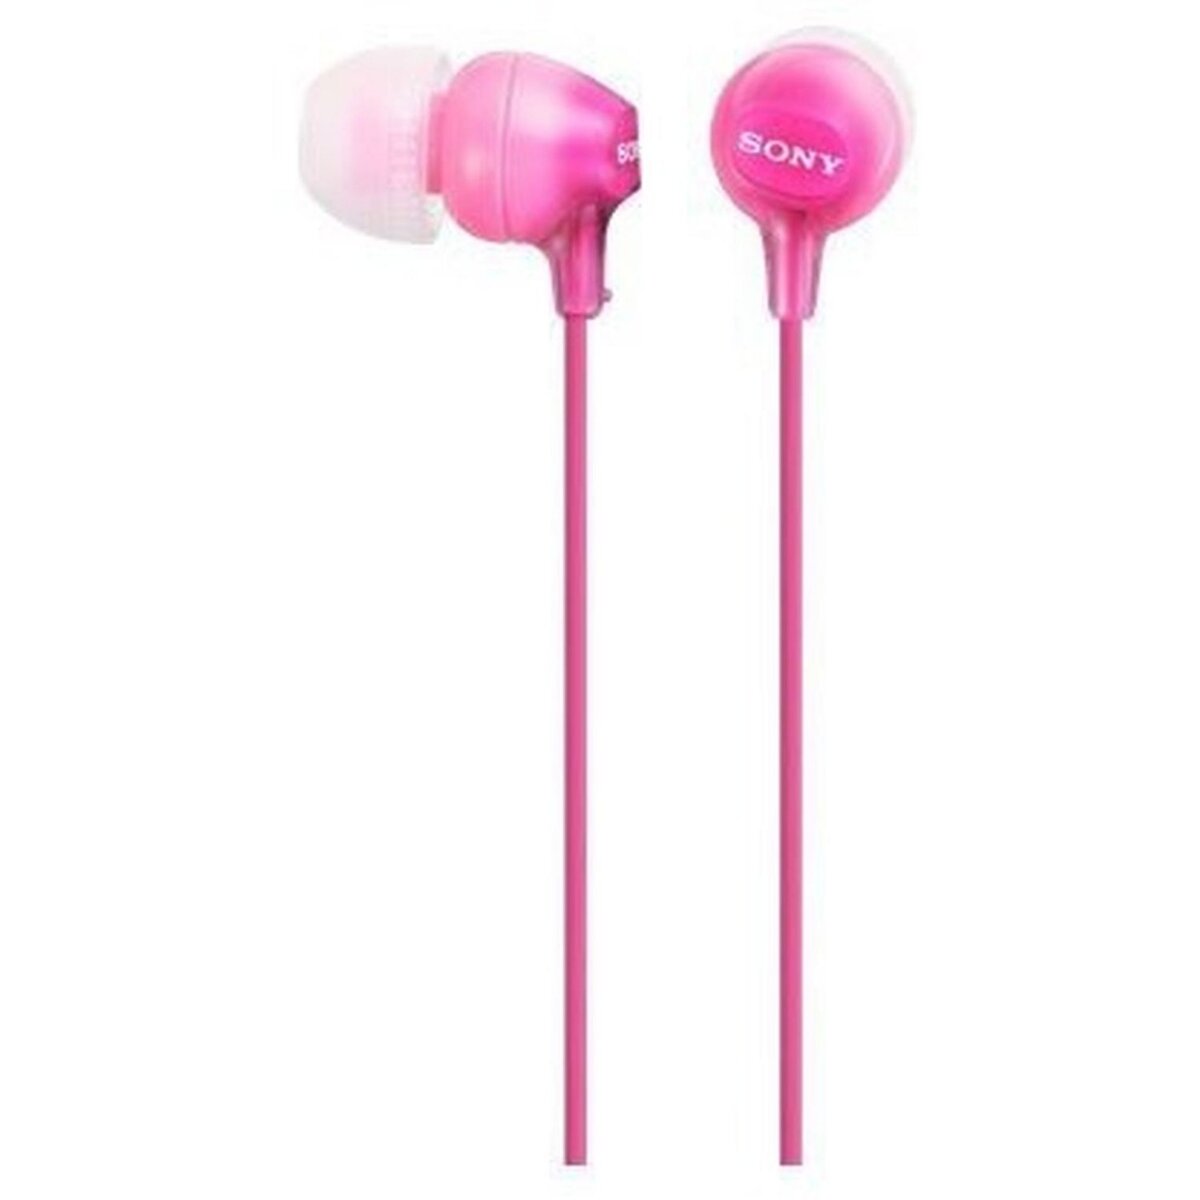 SONY Ecouteurs - Rose - MDR-EX15